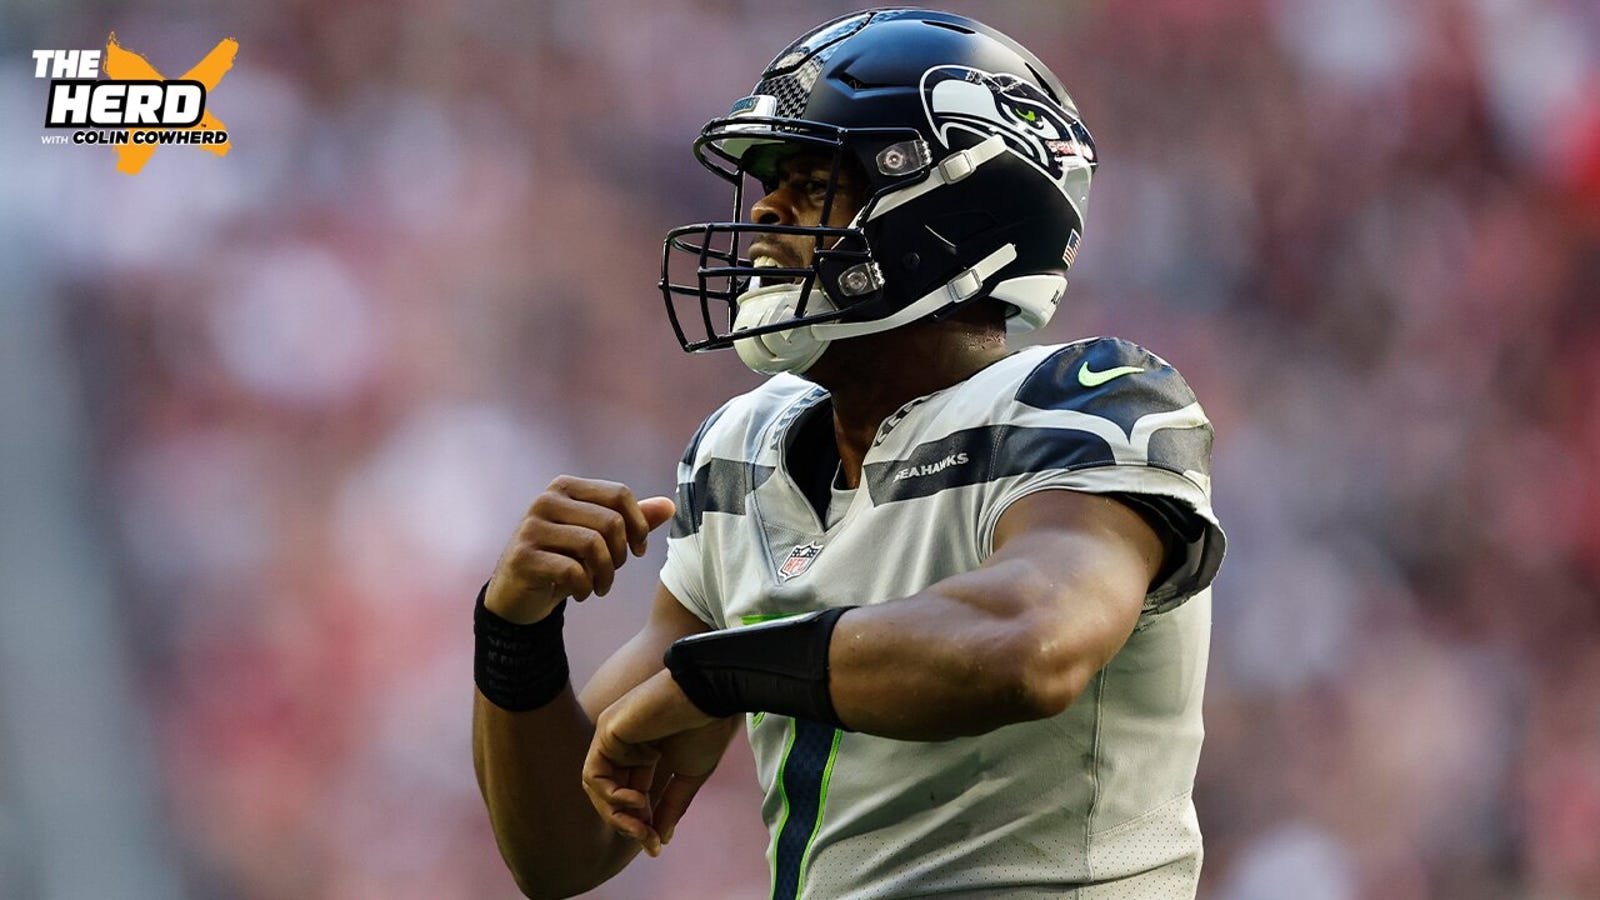 What makes Geno Smith, Seahawks unexpectedly successful this season | THE HERD